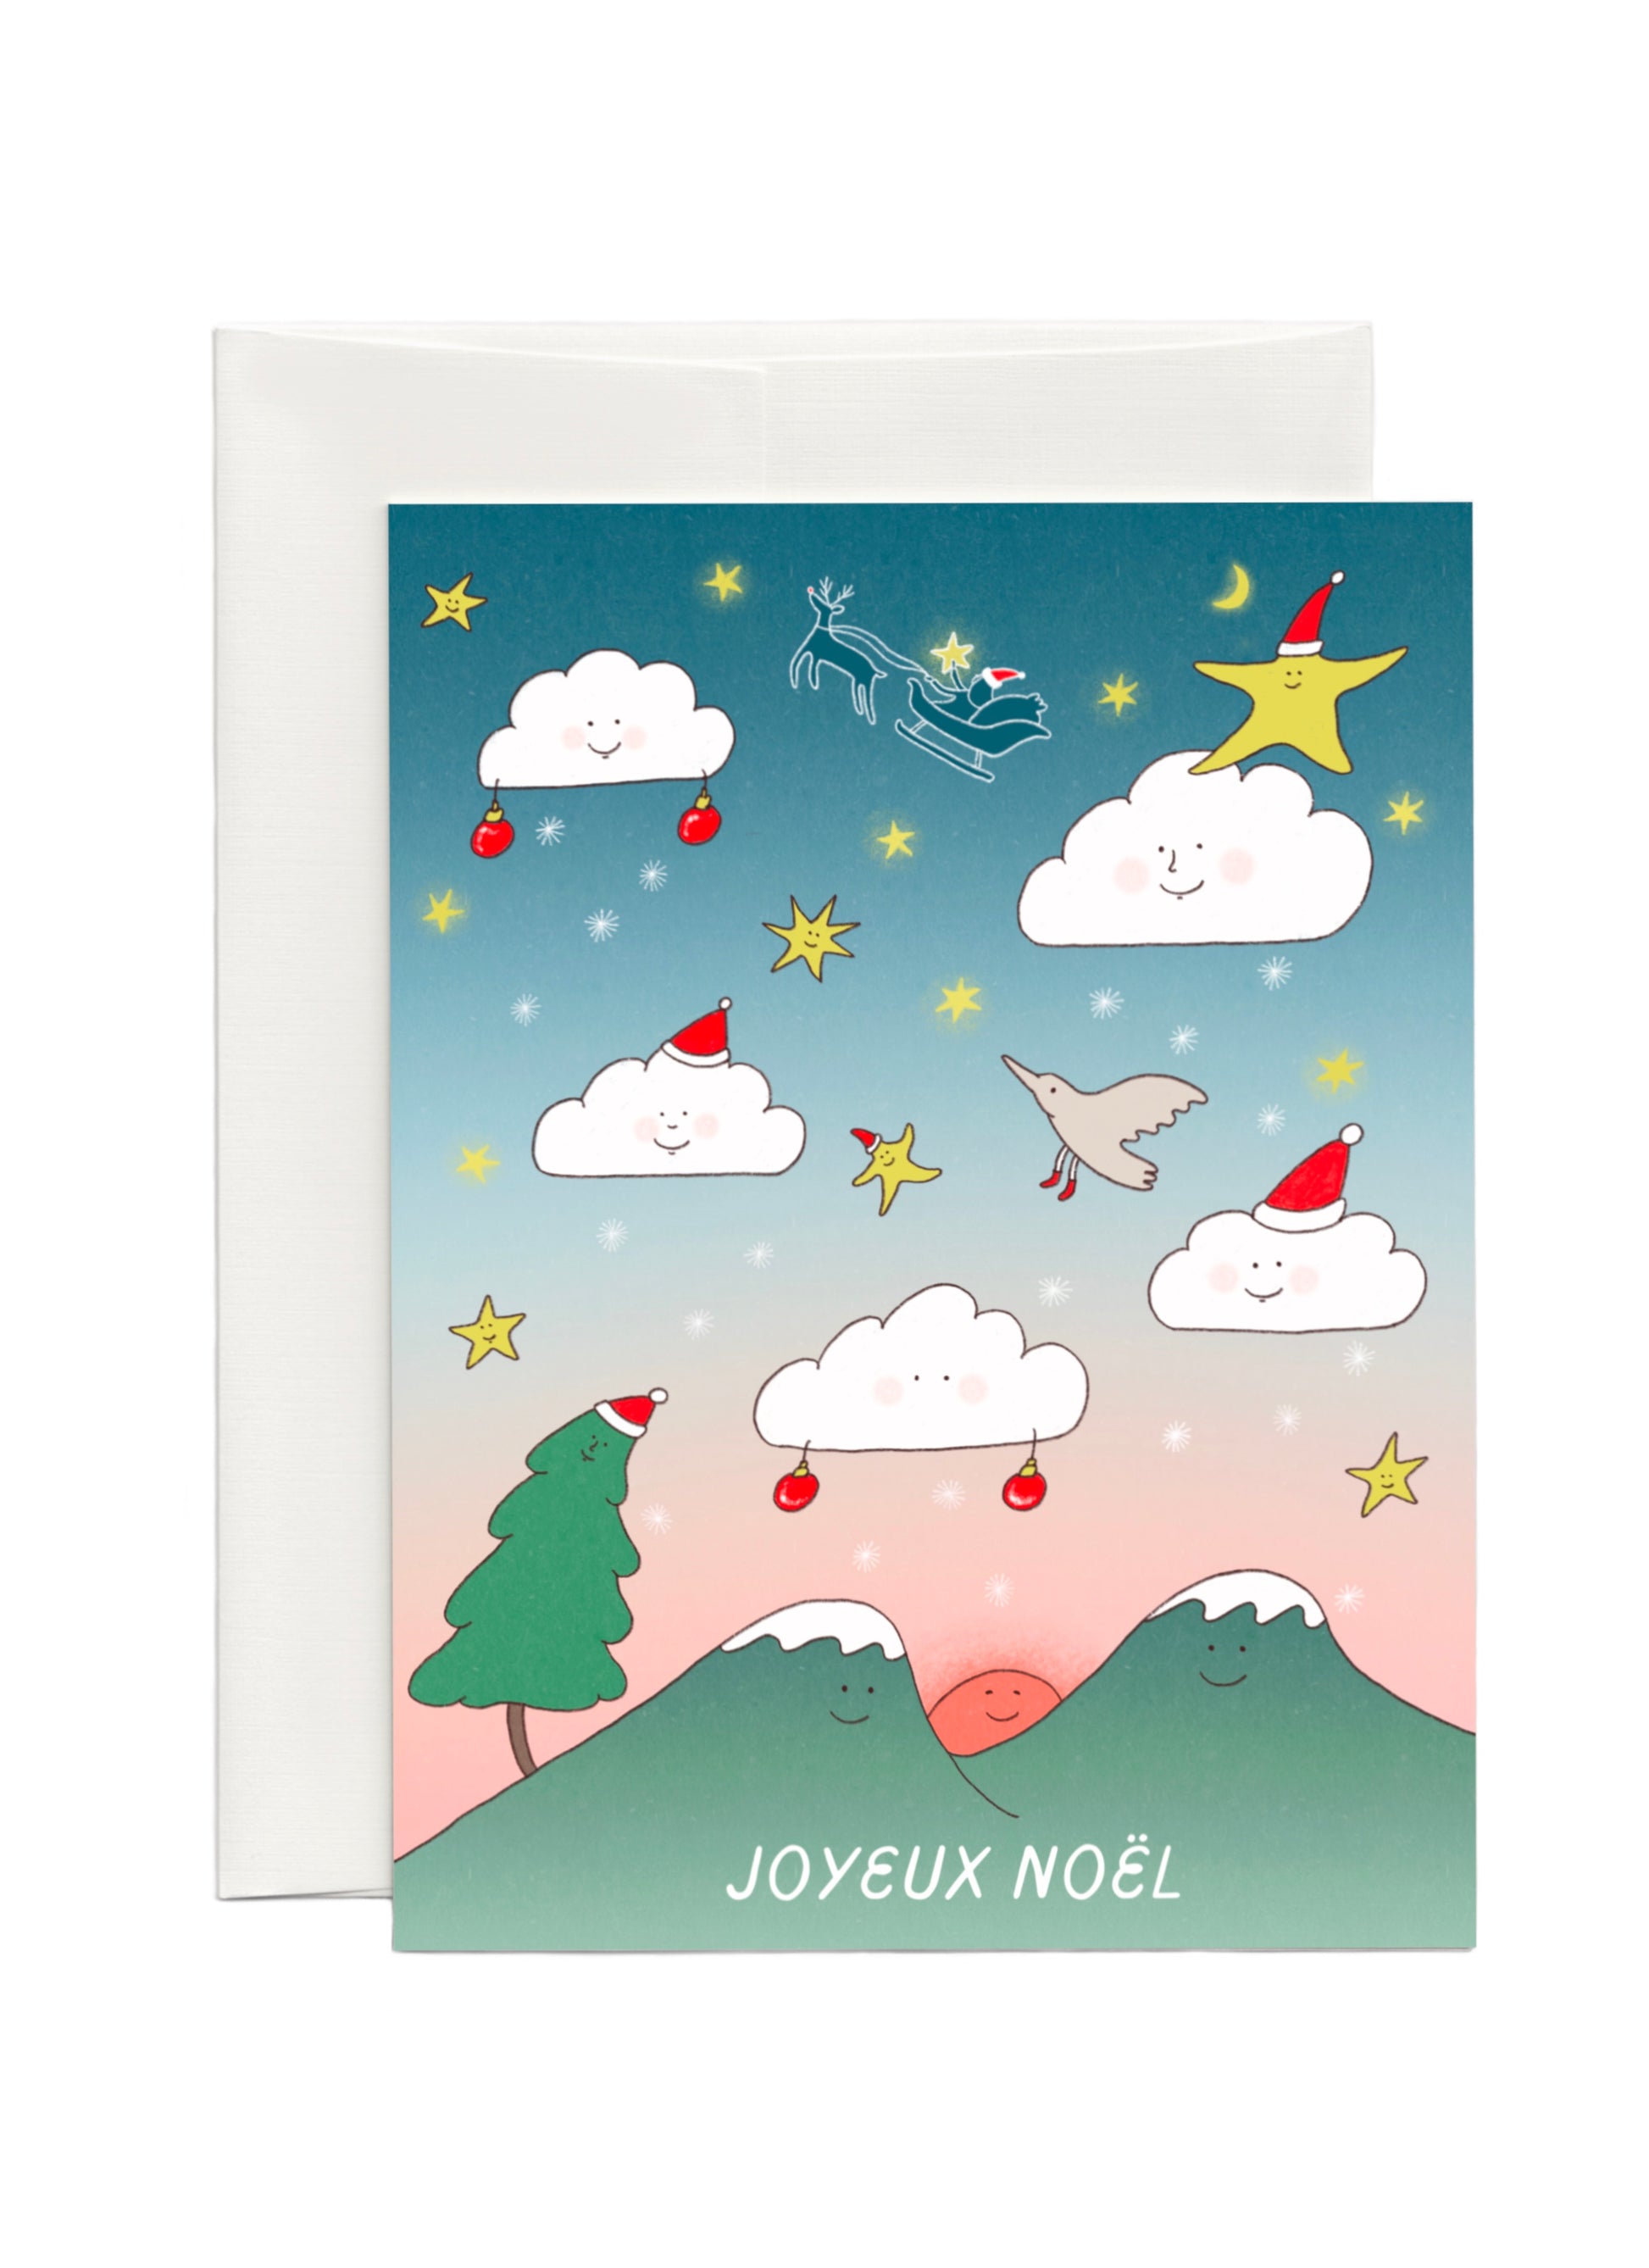 Cute french Christmas Card with clouds with faces floating in the gradient sky along with stars, snow flakes above the mountains